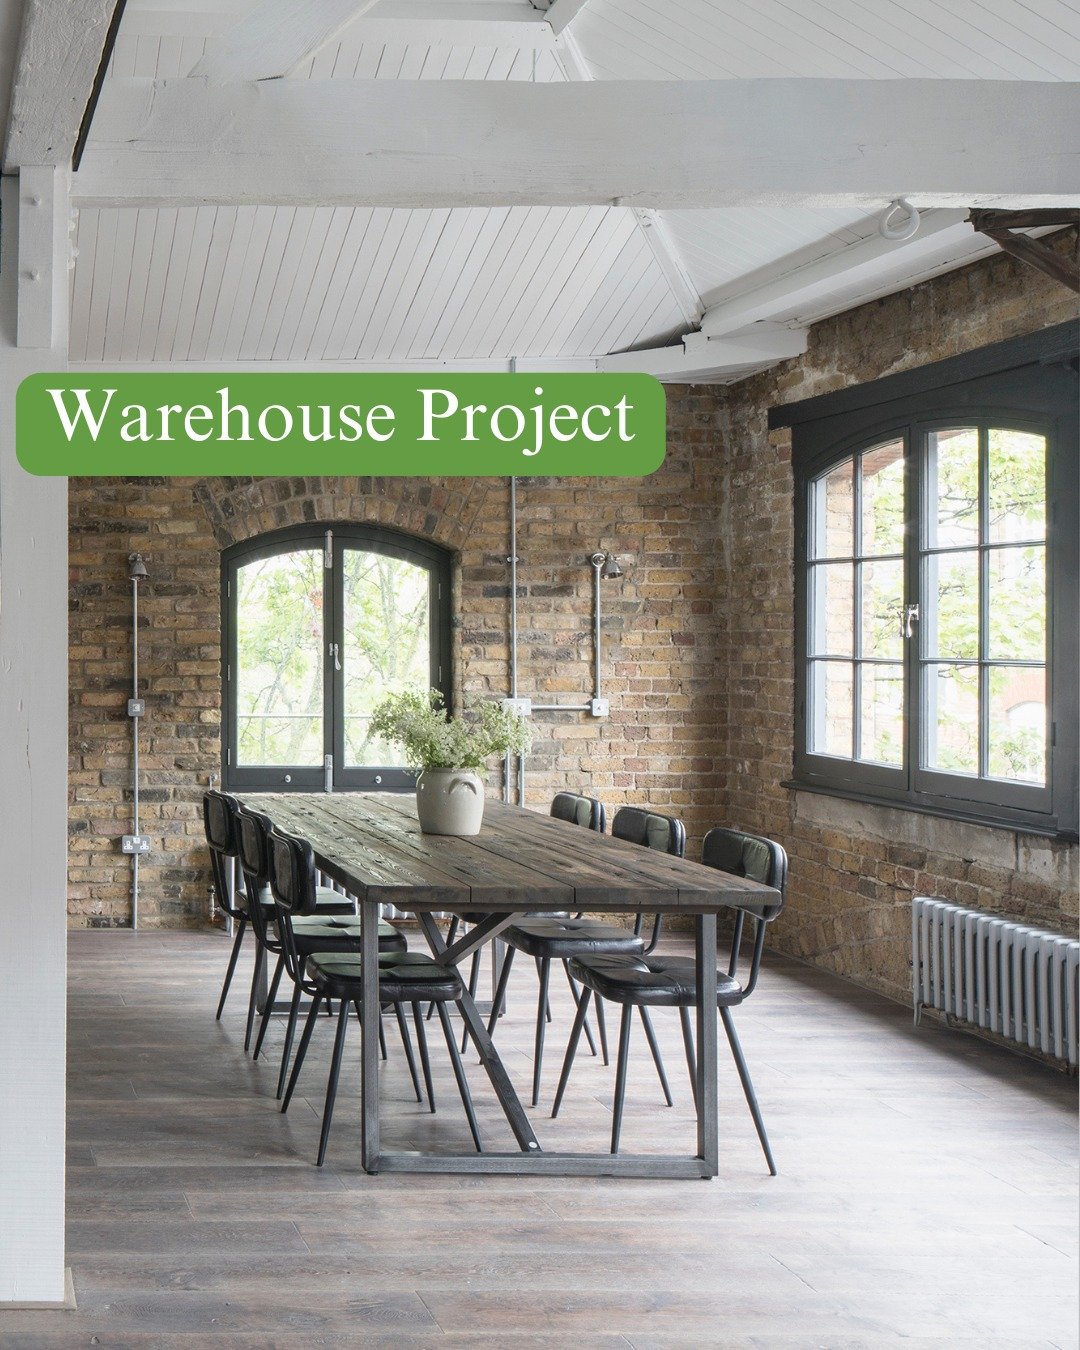 This warehouse transformation showcases our expertise in marrying the rustic charm of cast iron radiators with sophisticated, complementary lighting designs. 

A testament to our collaboration with trade professionals, every detail reflects our commi